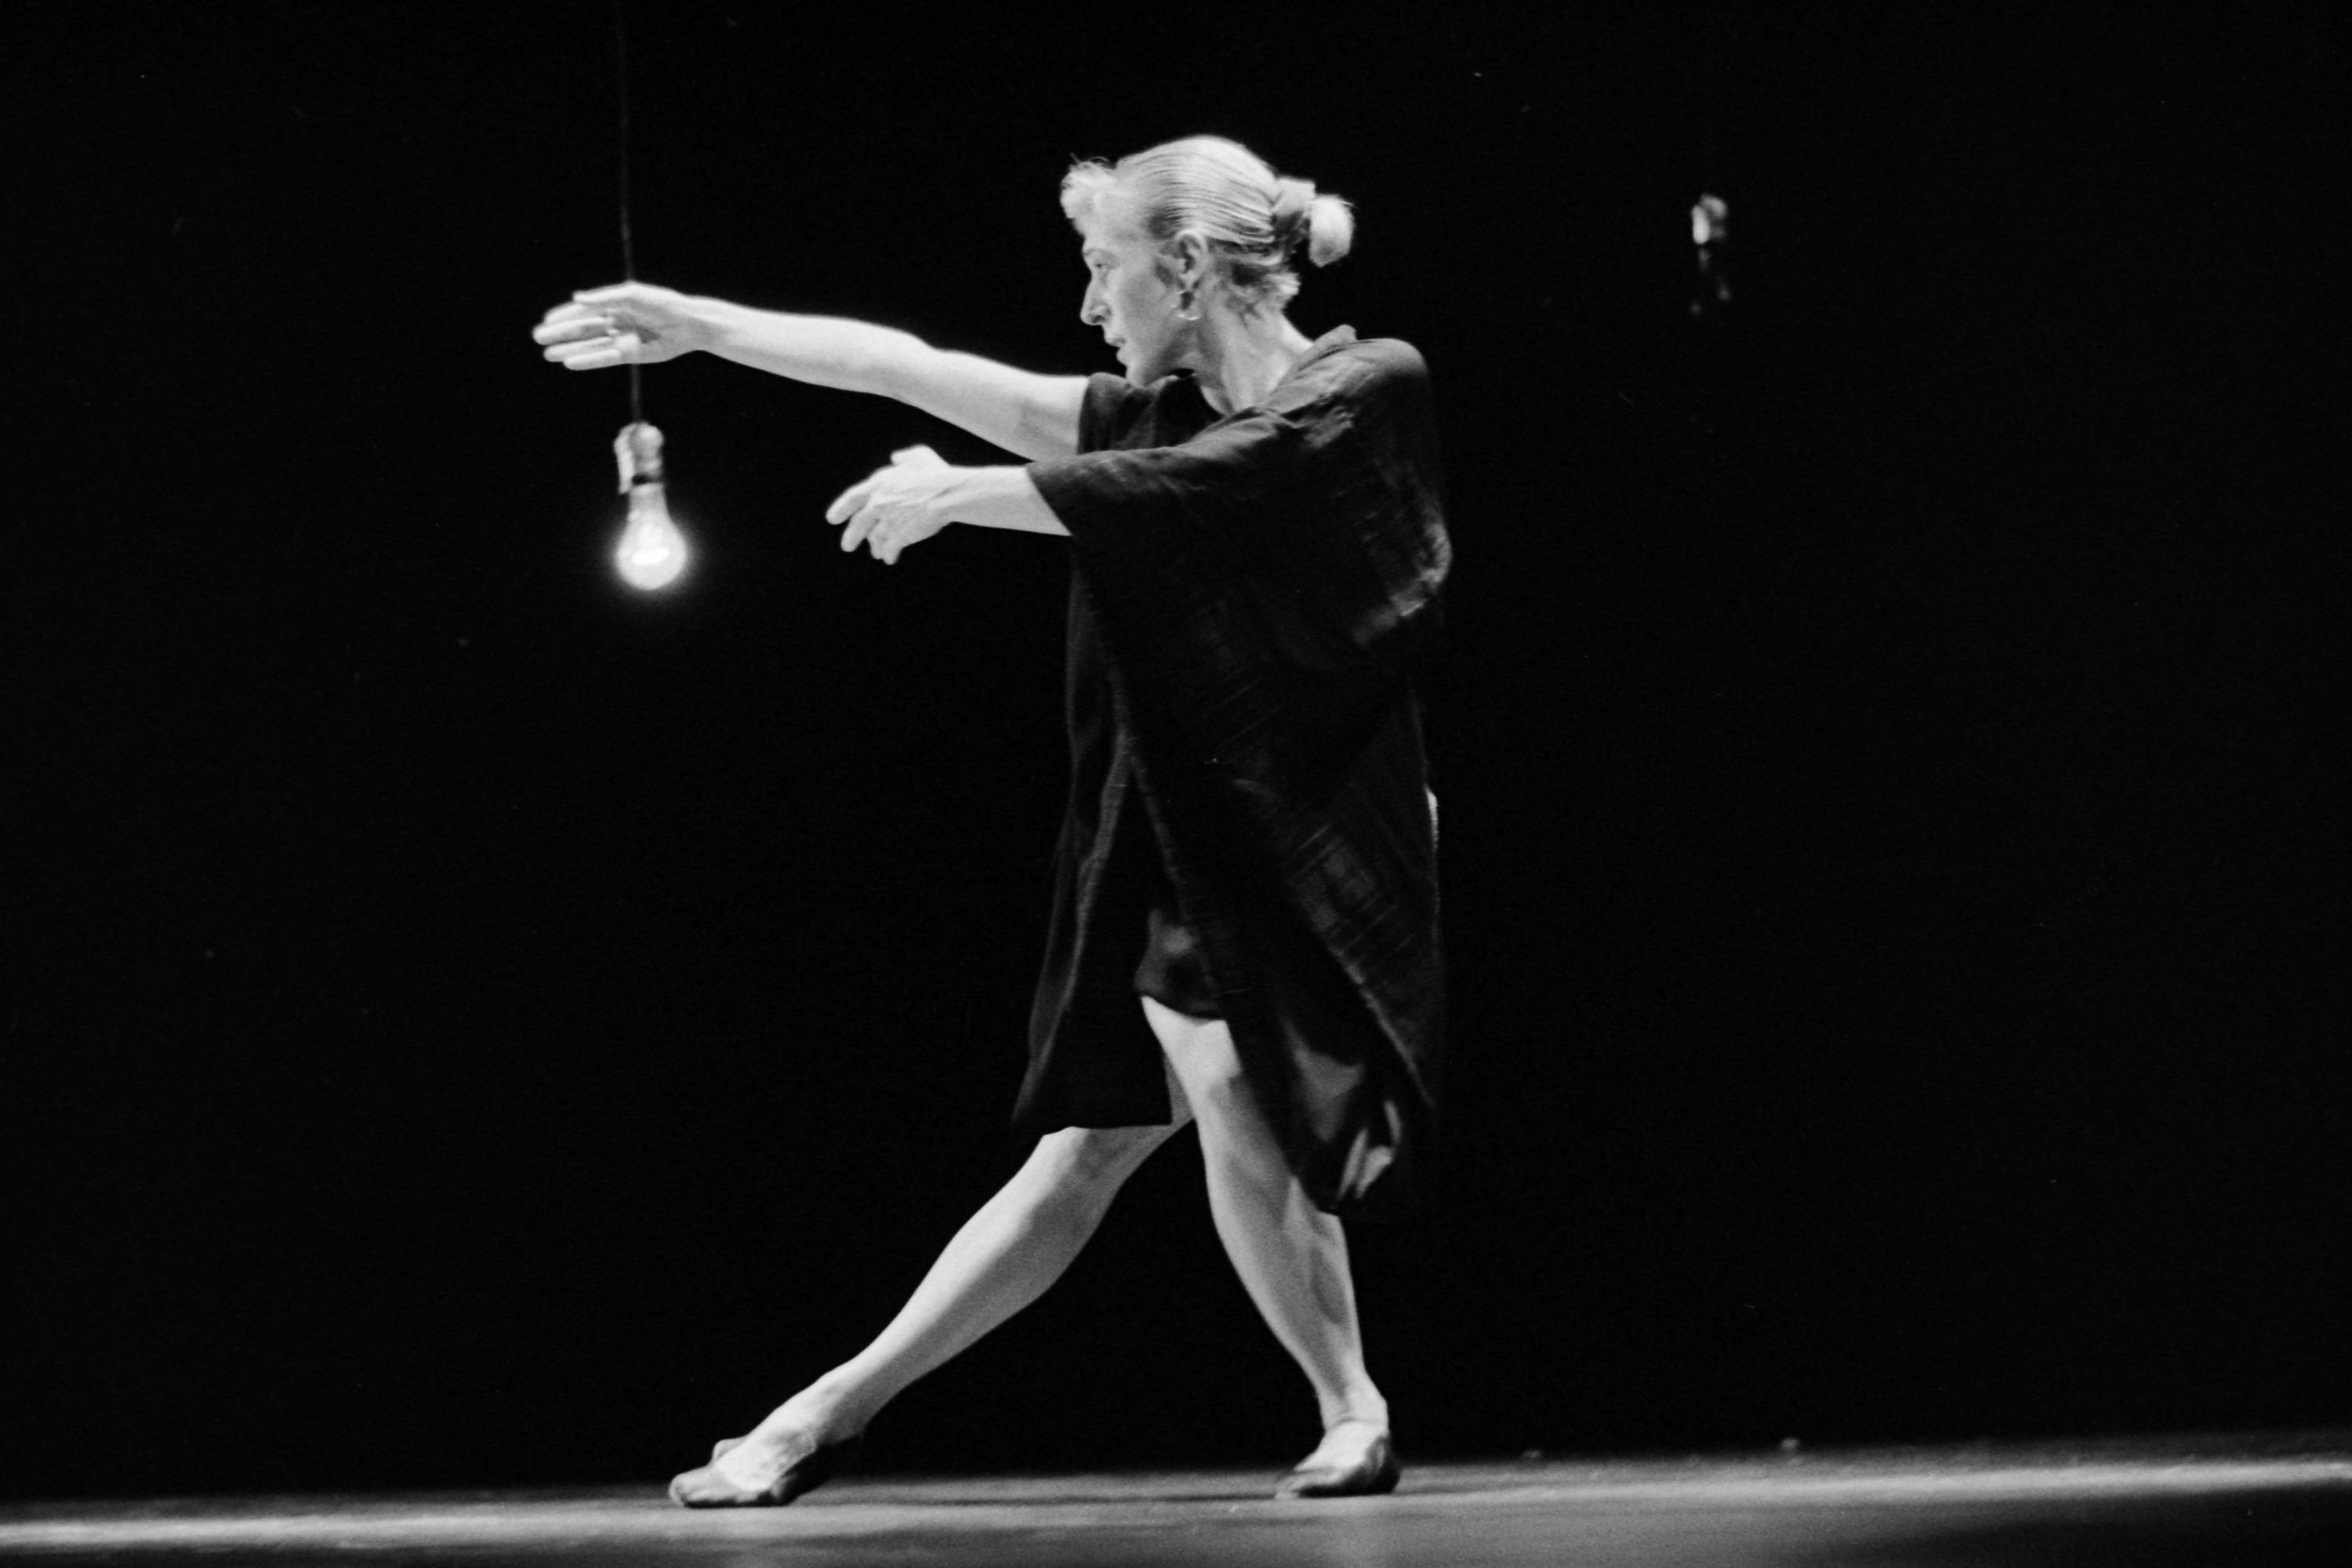 Dancer with arm, leg and gaze to the left of the black and white image